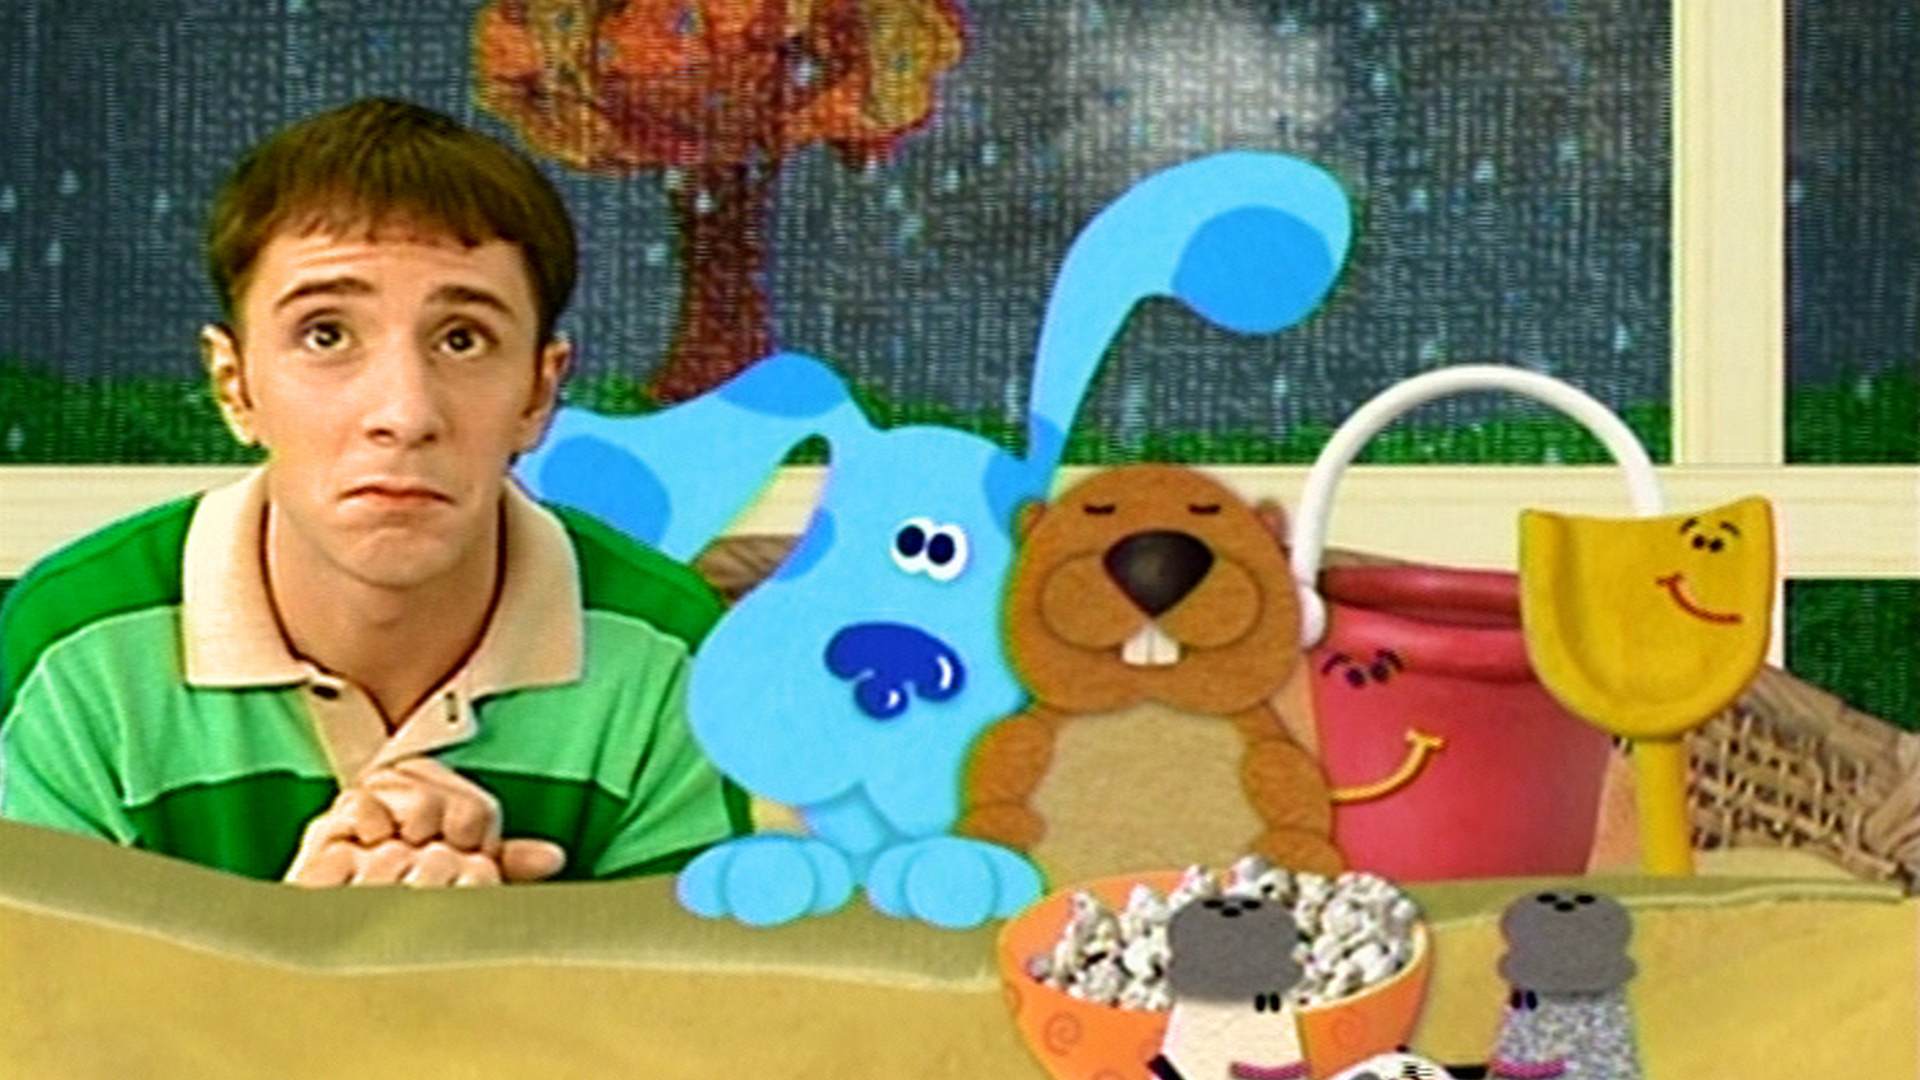 Watch Blue S Clues Season Episode What S That Sound Full Show On CBS All Access